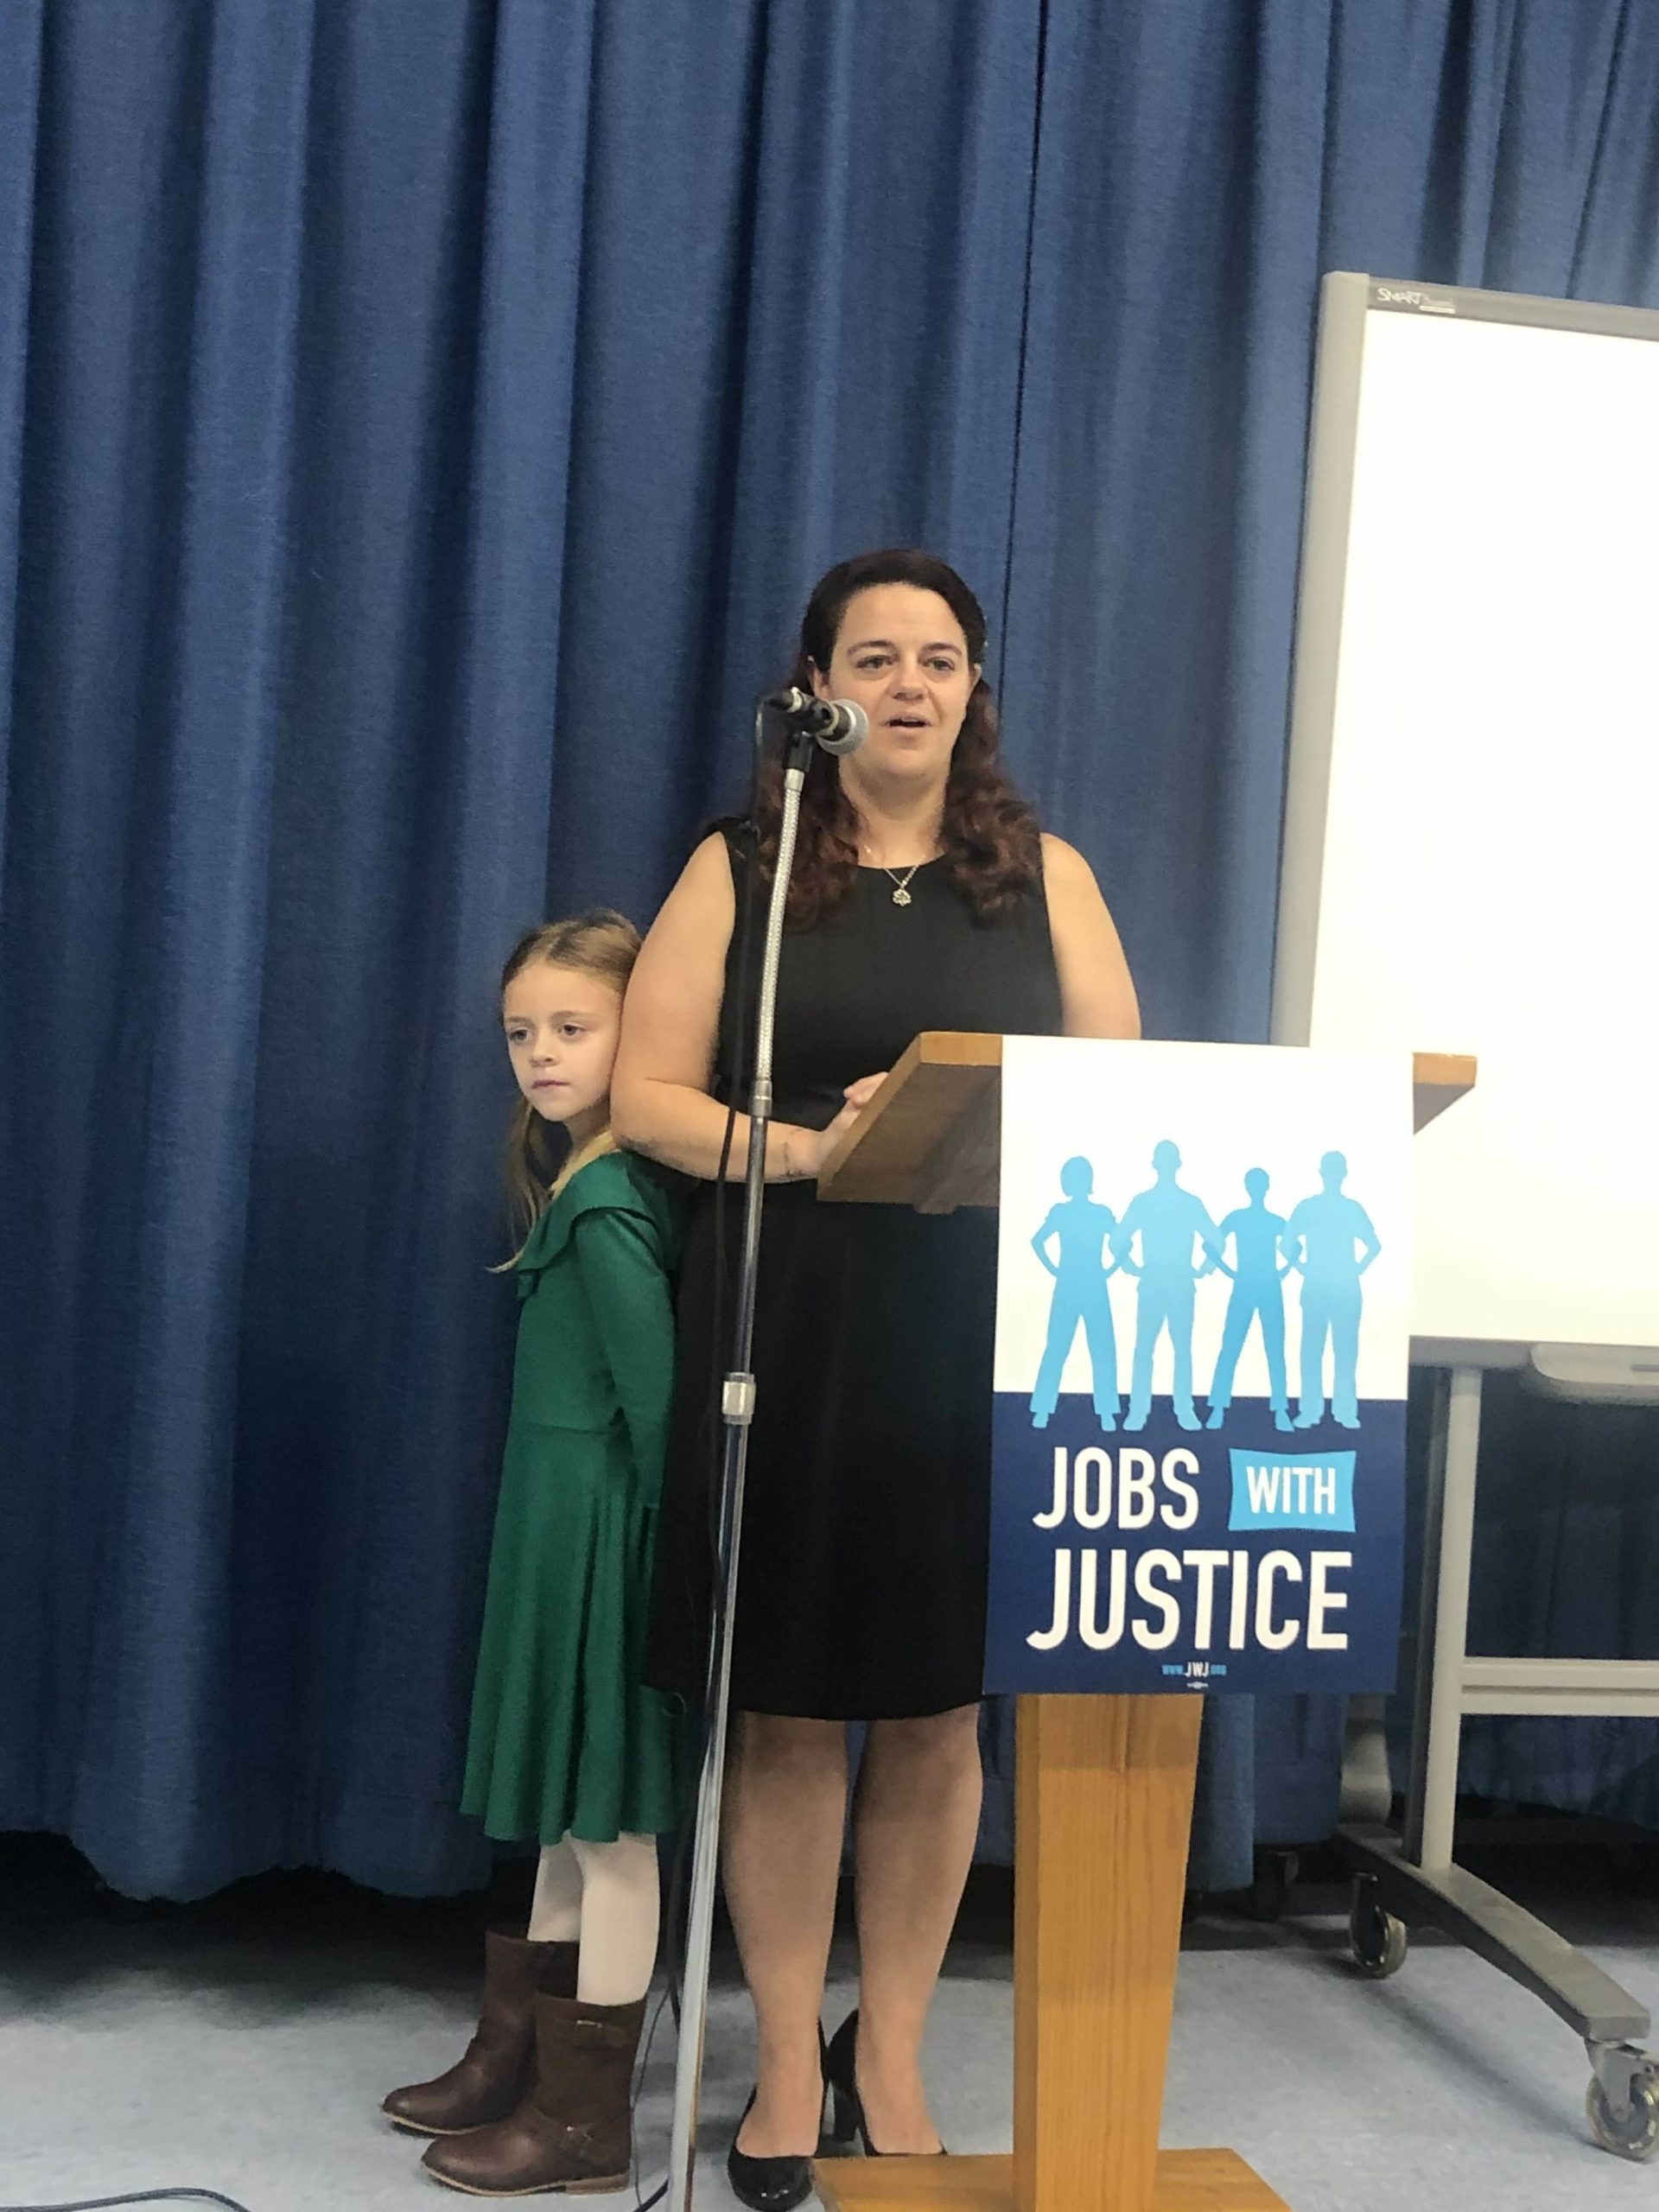 Lisa Votino-Tarrant received an award from Long Island Jobs with Justice for her work with asylum-seekkers at the southern border. She was presented with it at the annual Human Rights Day Interfaith Luncheon. So far, Ms. Votino-Tarrant has made five trips to Tijuana.